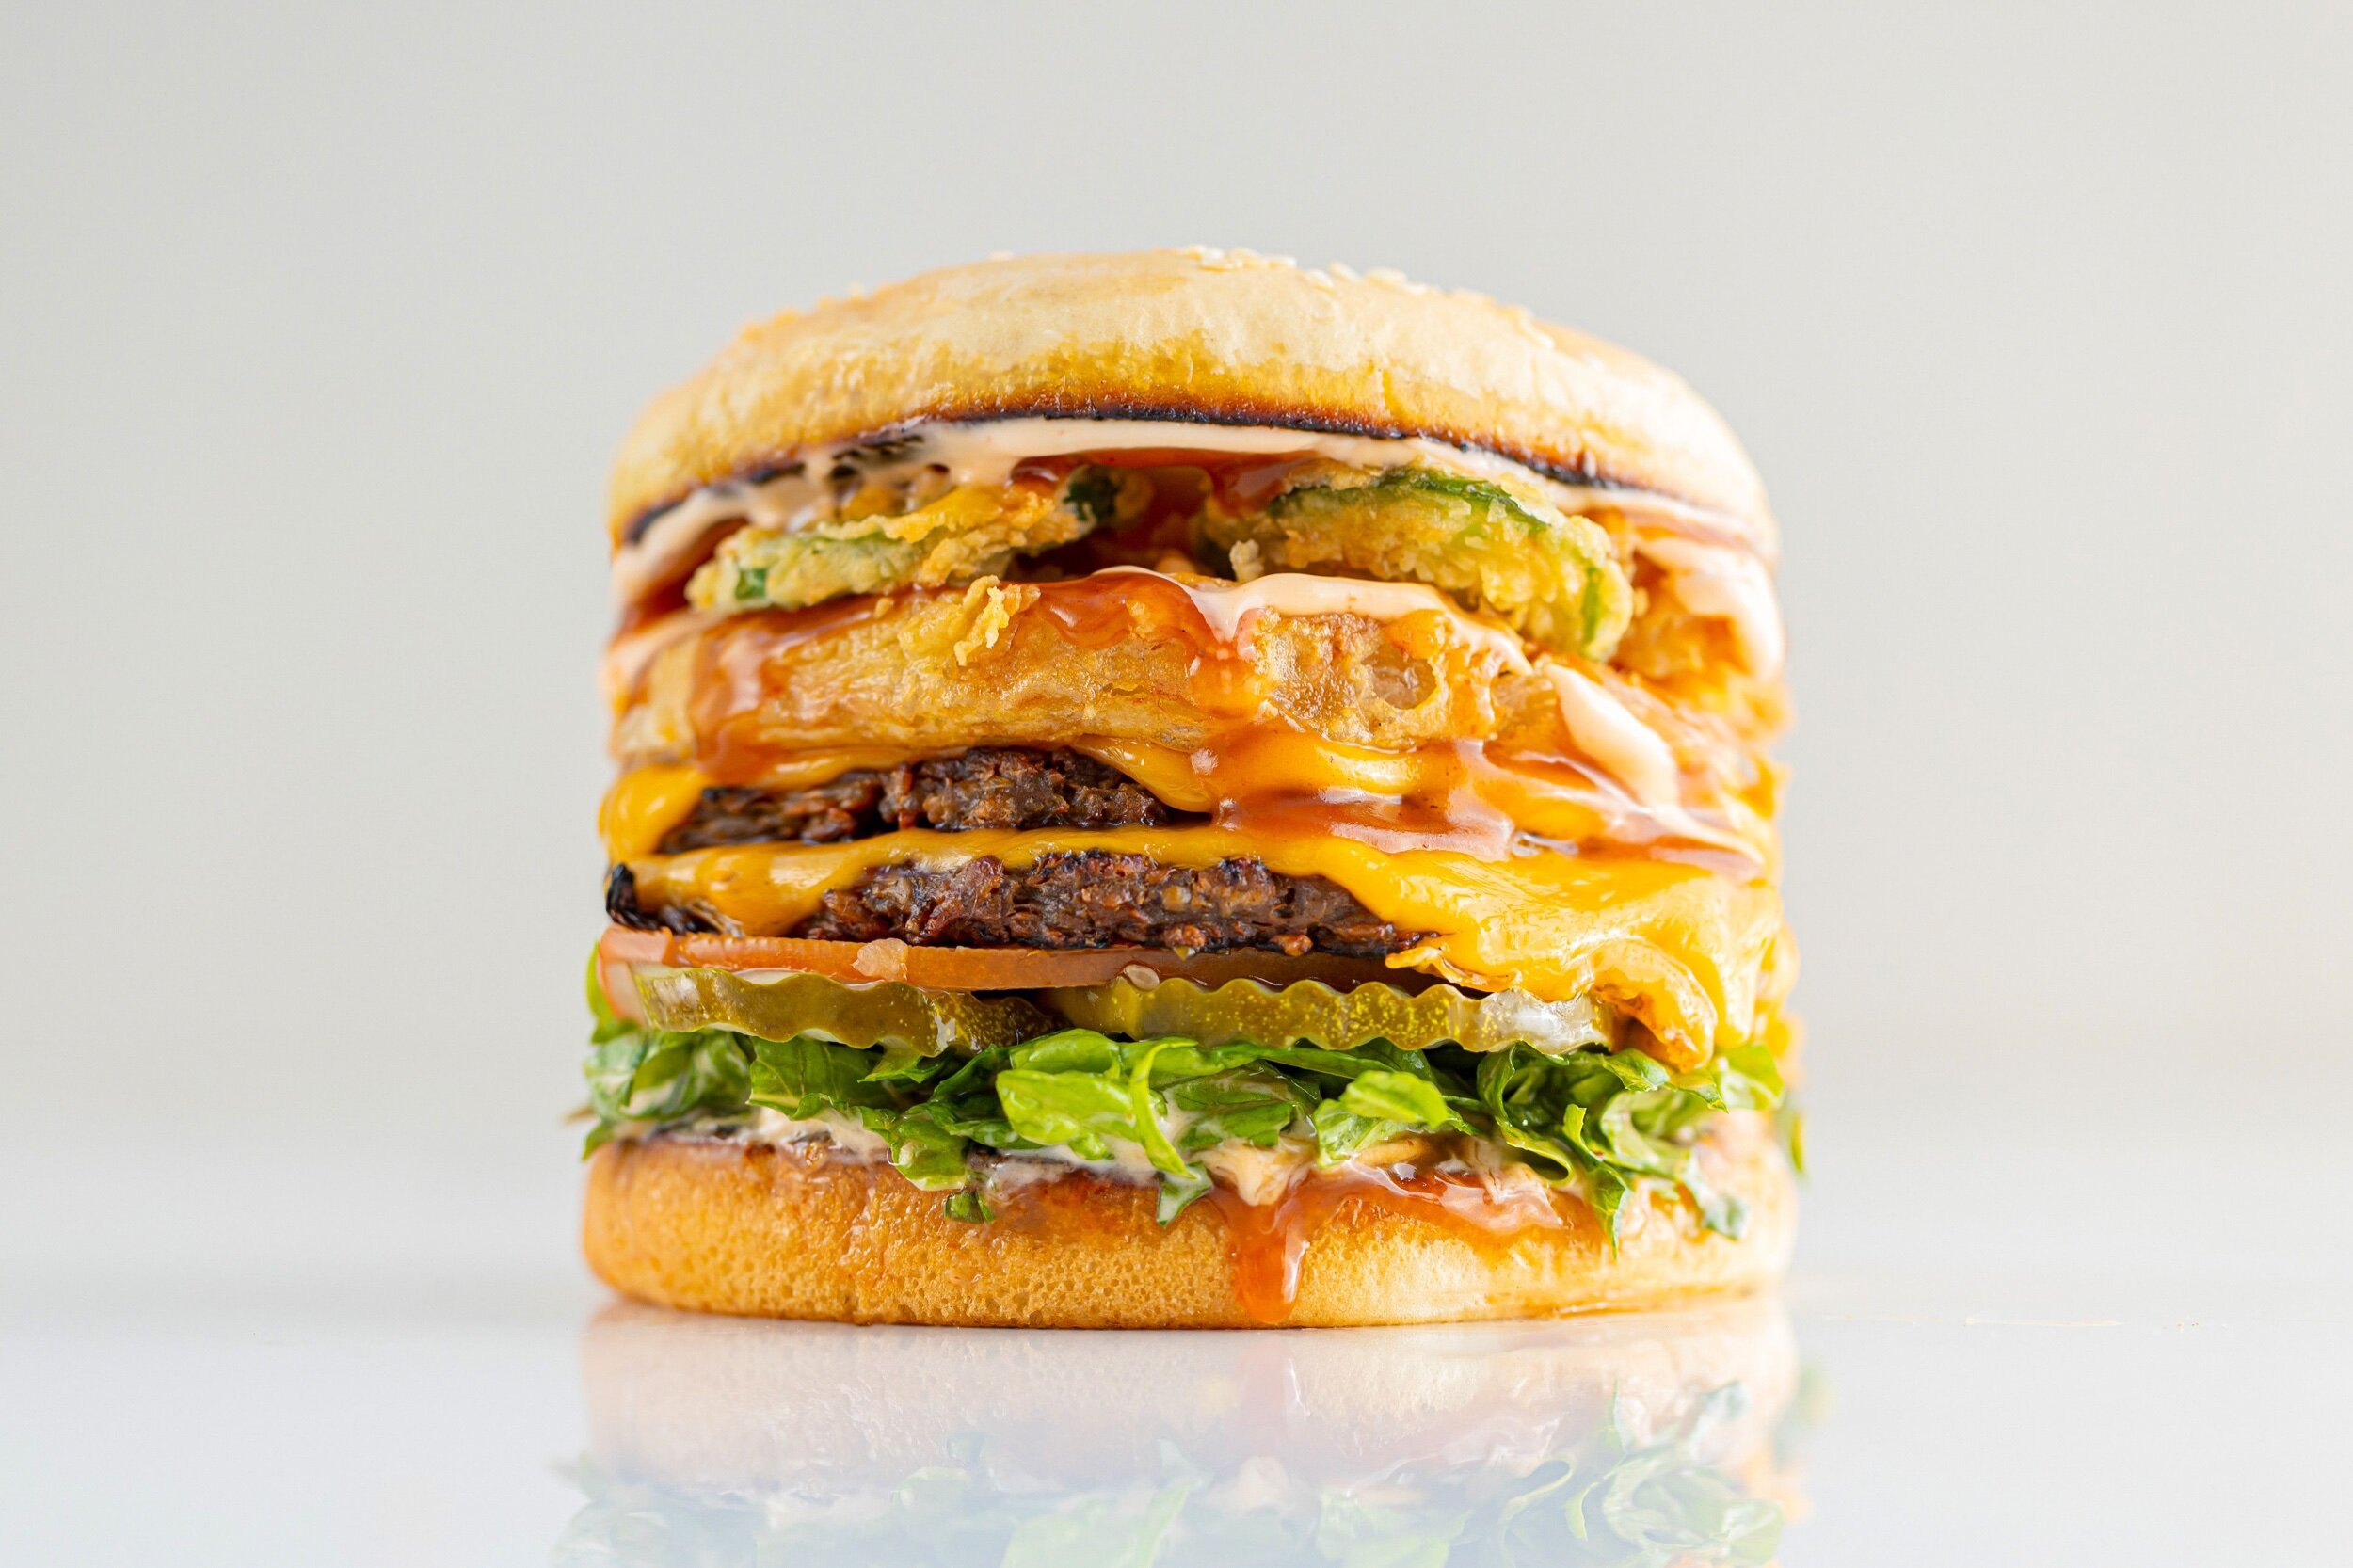 A stacked burger with fried ingredients and melty cheese on a white background.